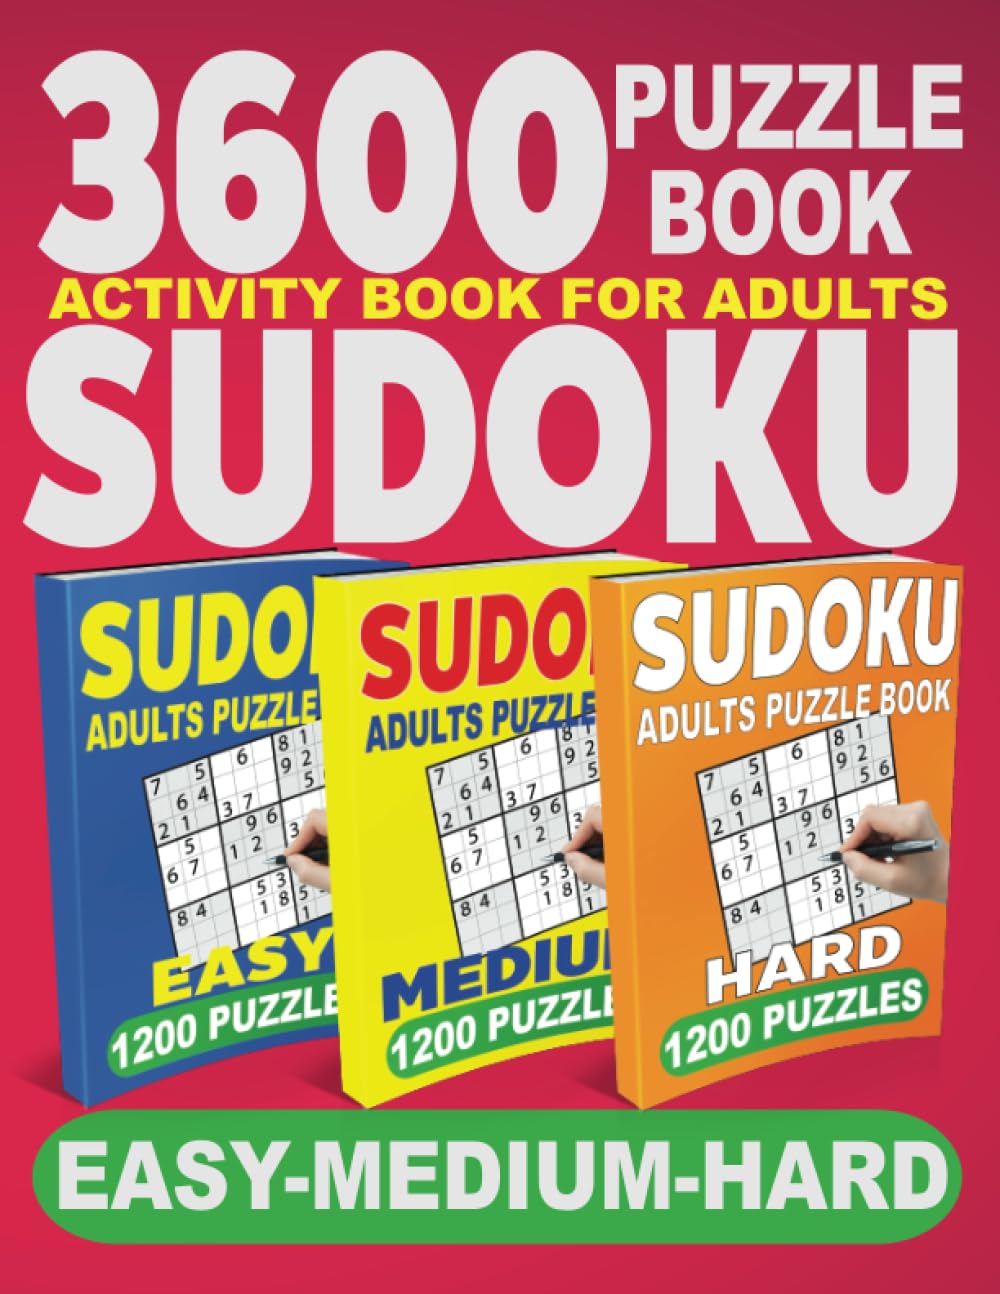 3600 Sudoku Puzzle Book Activity Book For Adults Sudoku Adult Puzzles Book | Adult Books Paperback: 3600 Sudoku Puzzles For Adults Easy Medium Hard Level